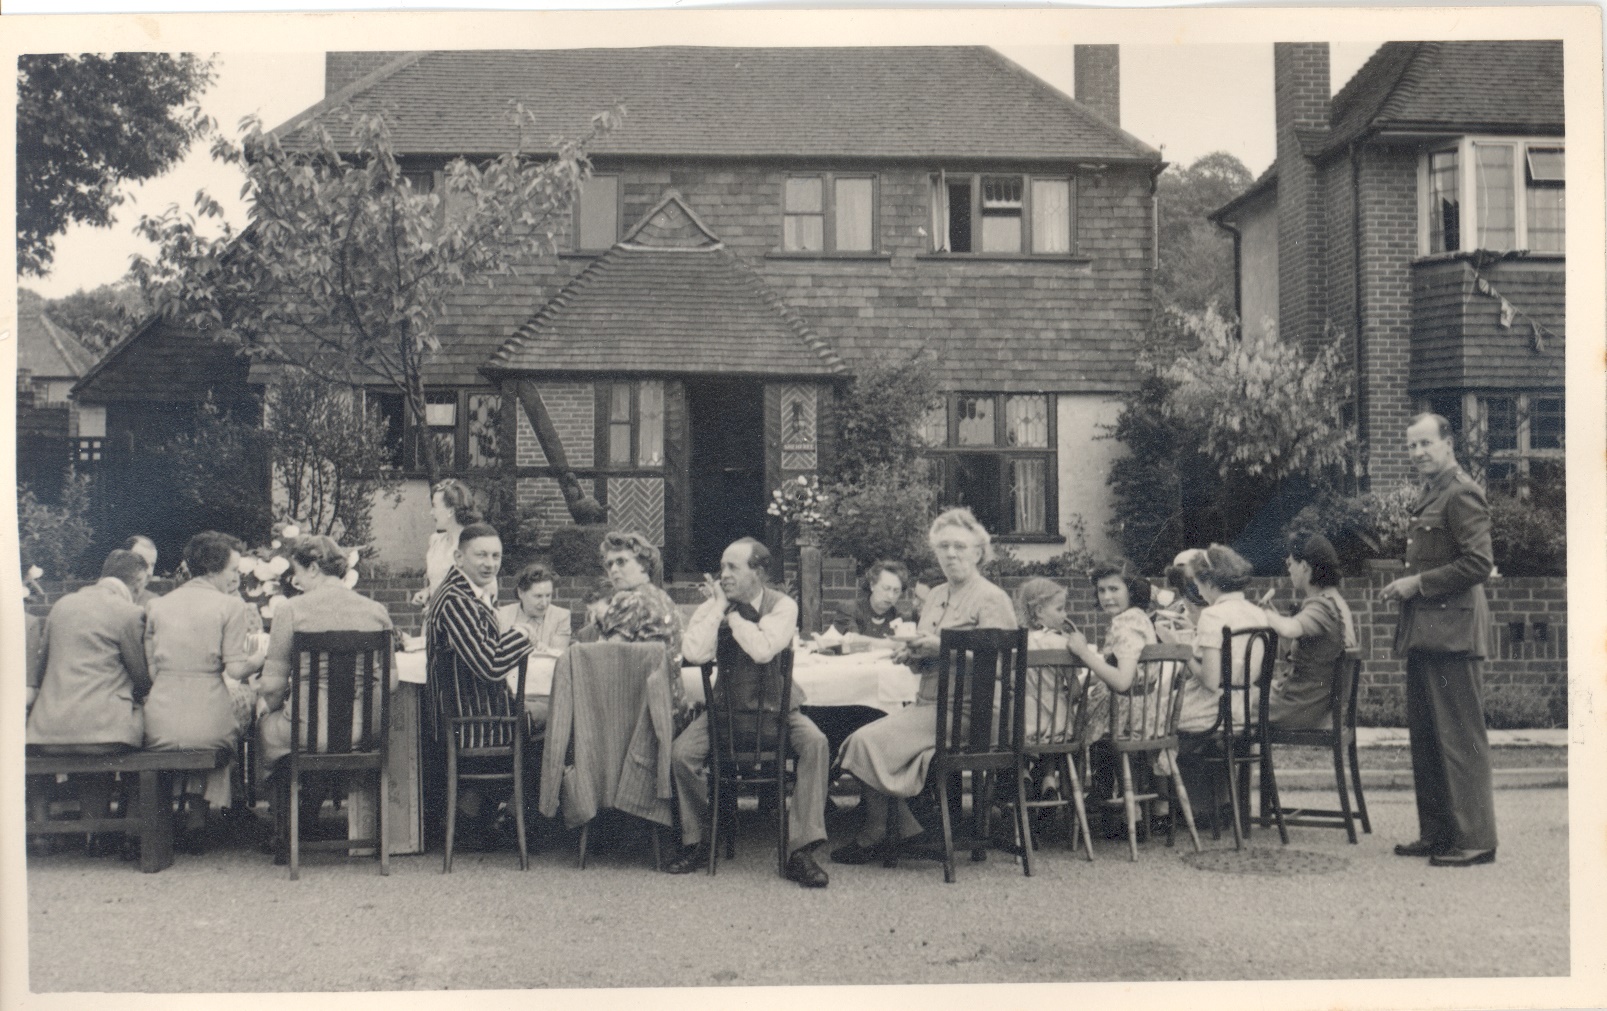 Image of VE day street celebrations in Greenways, Hinchley Wood